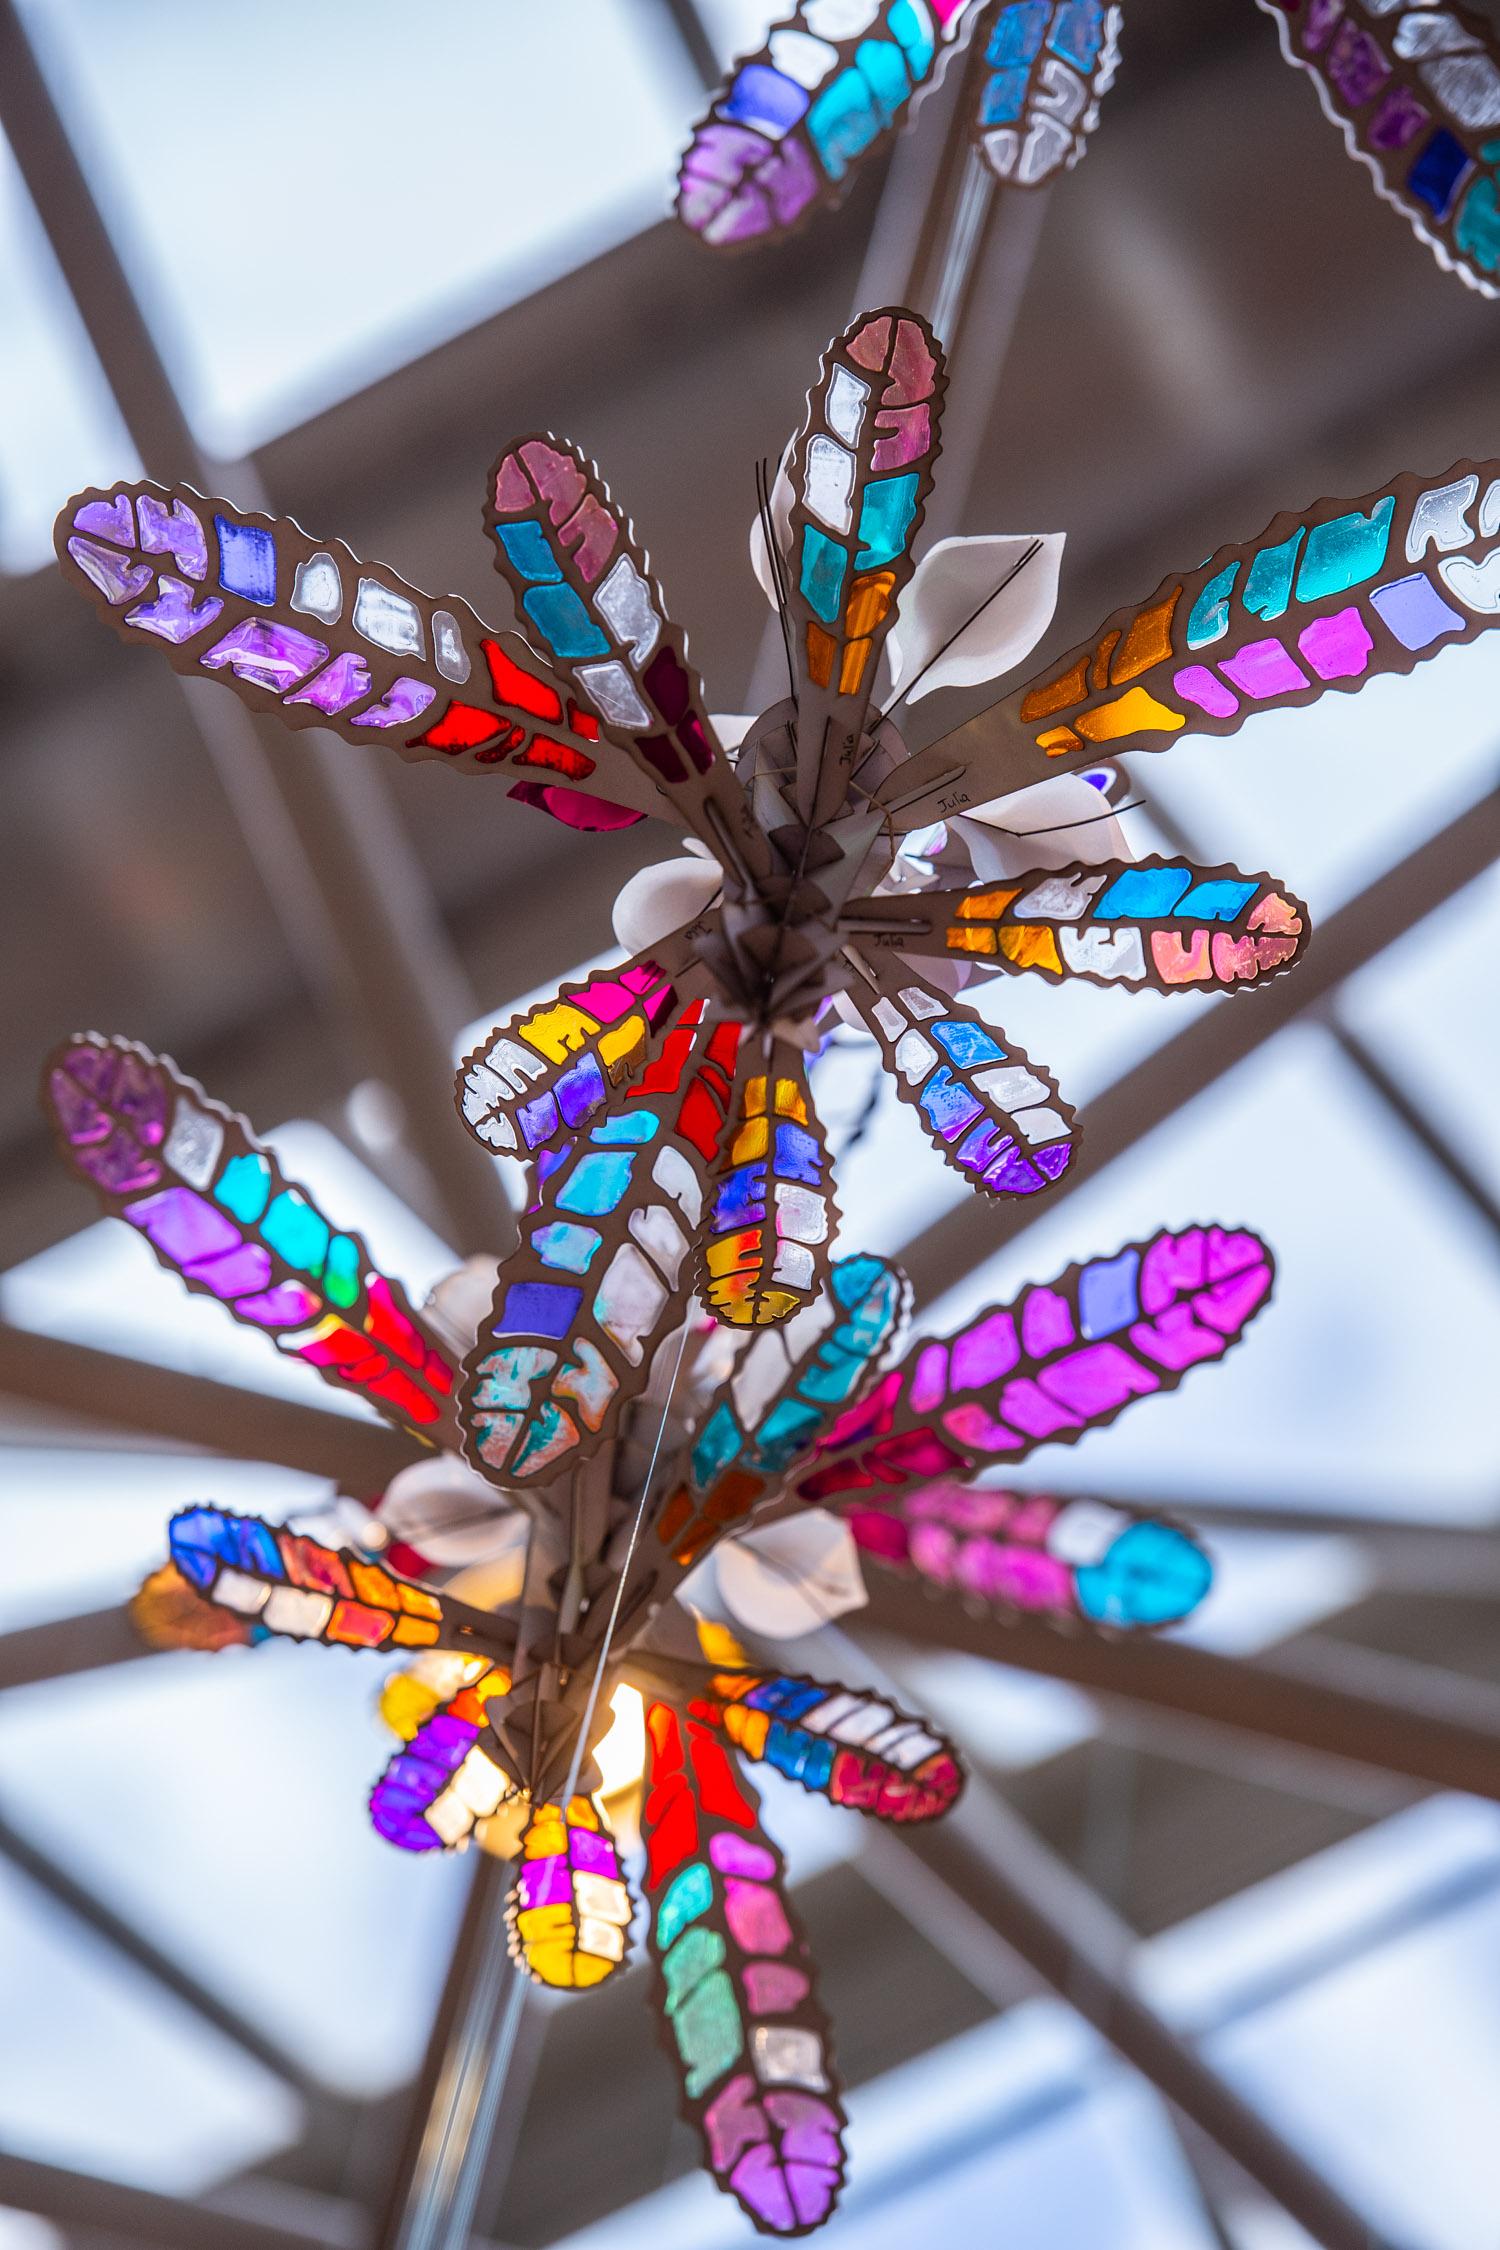 Small handmade flower sculpture handing from a glass ceiling. The sculpture is made from a cardboard frame and the petals are made from various coloured material. The light shines through the petals and illuminates the colours. 